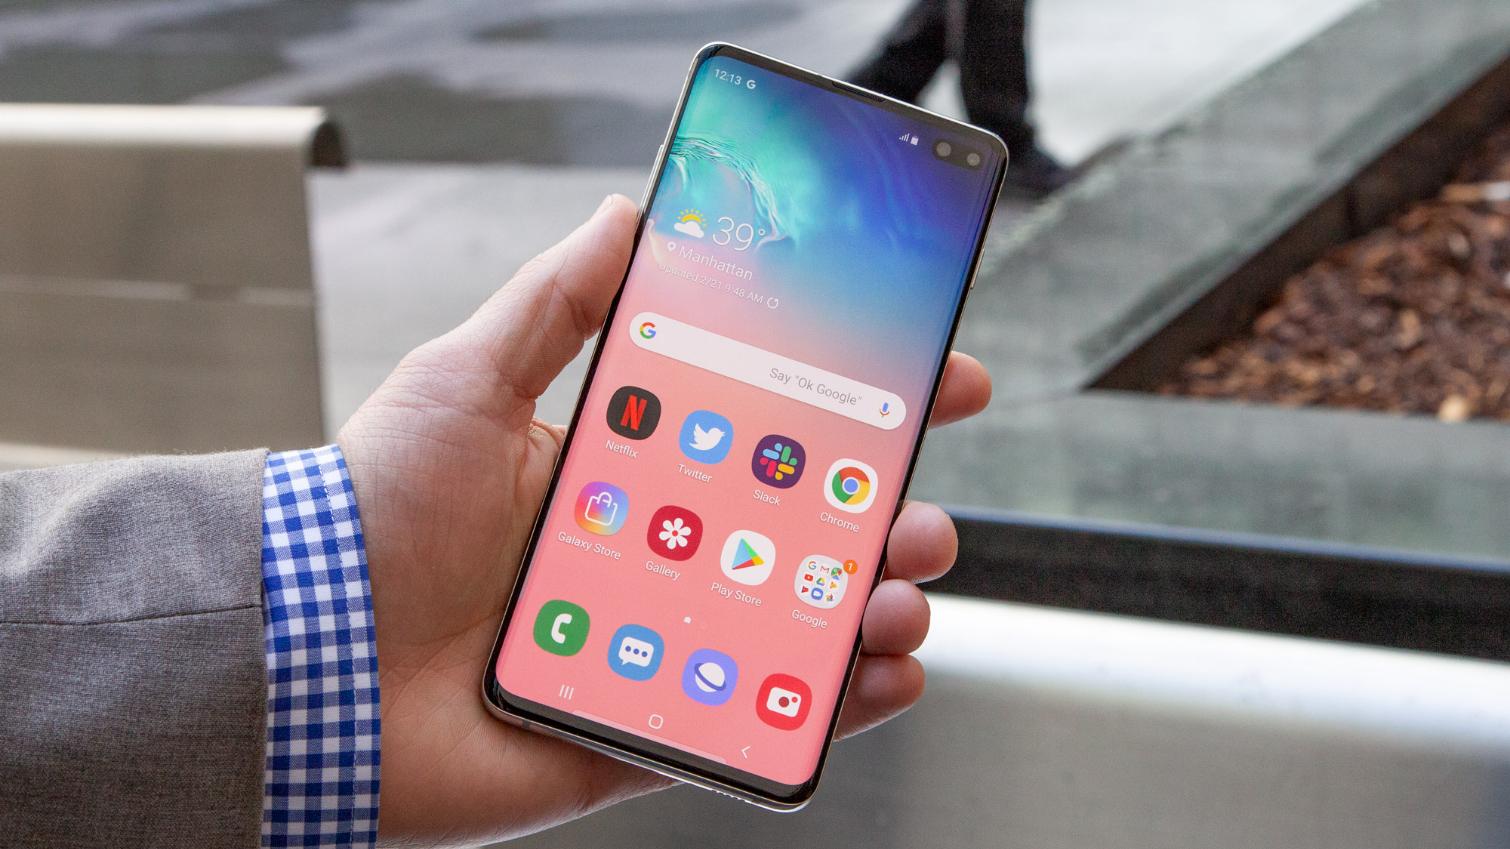 Best Galaxy S10 and S10 Plus Deals in June 2019